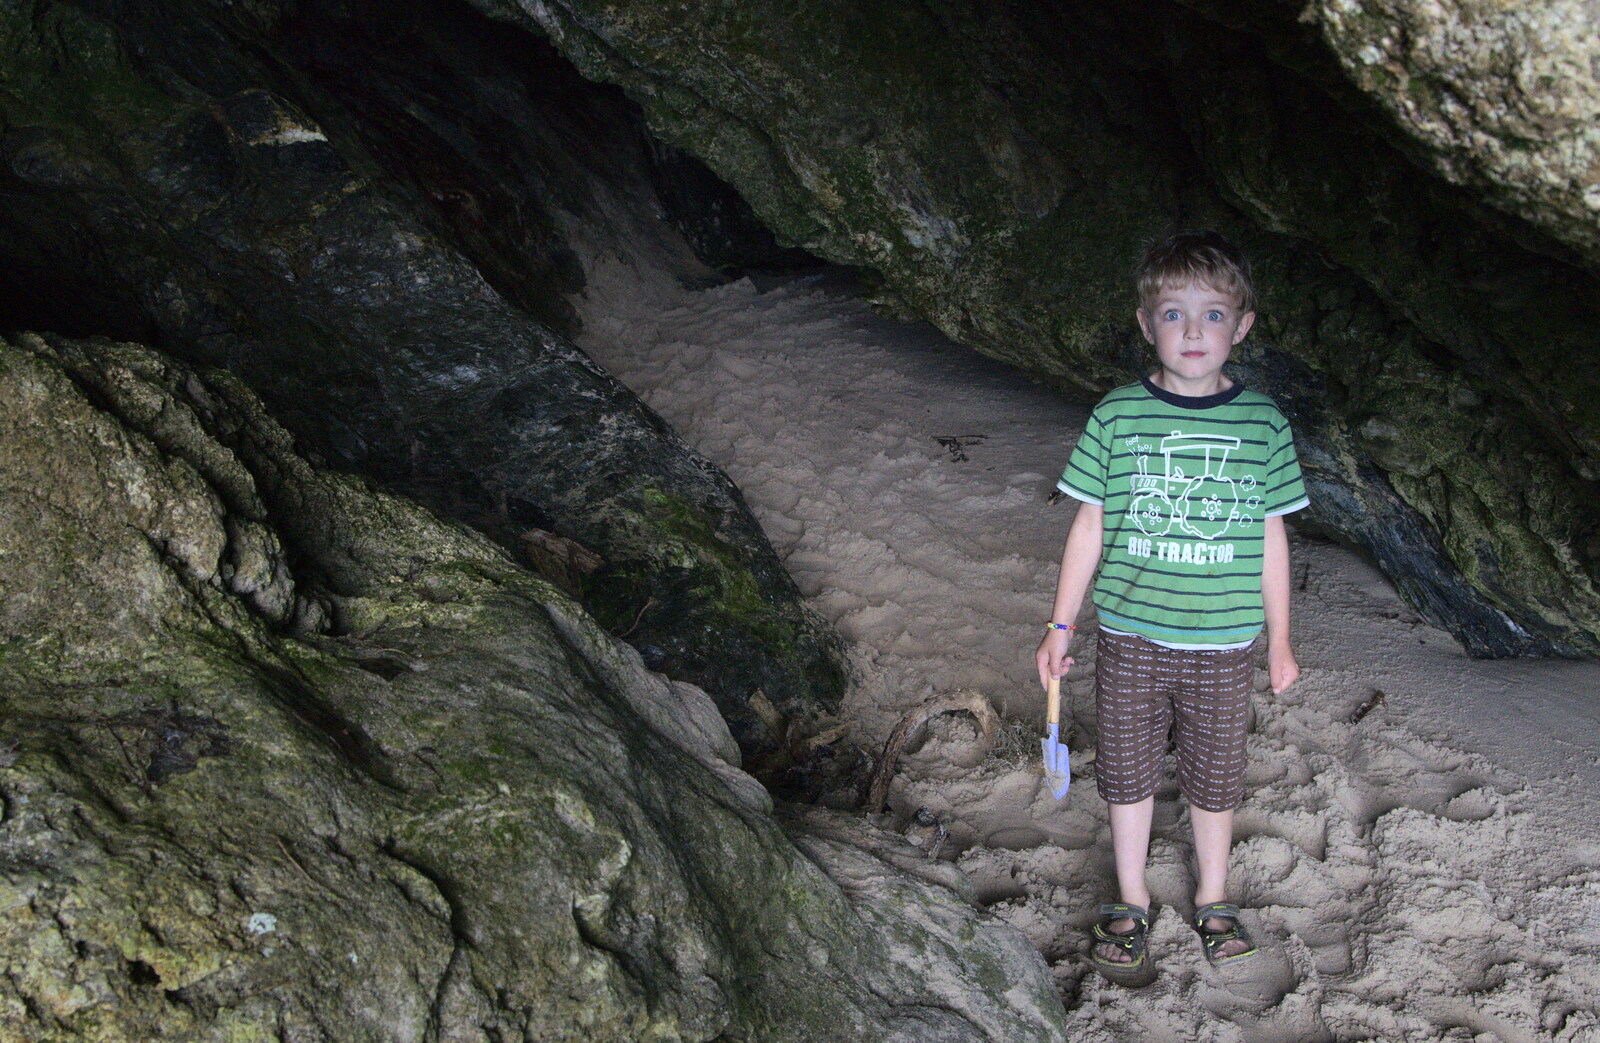 Fred in the cave from Camping at Silver Strand, Wicklow, County Wicklow, Ireland - 7th August 2014